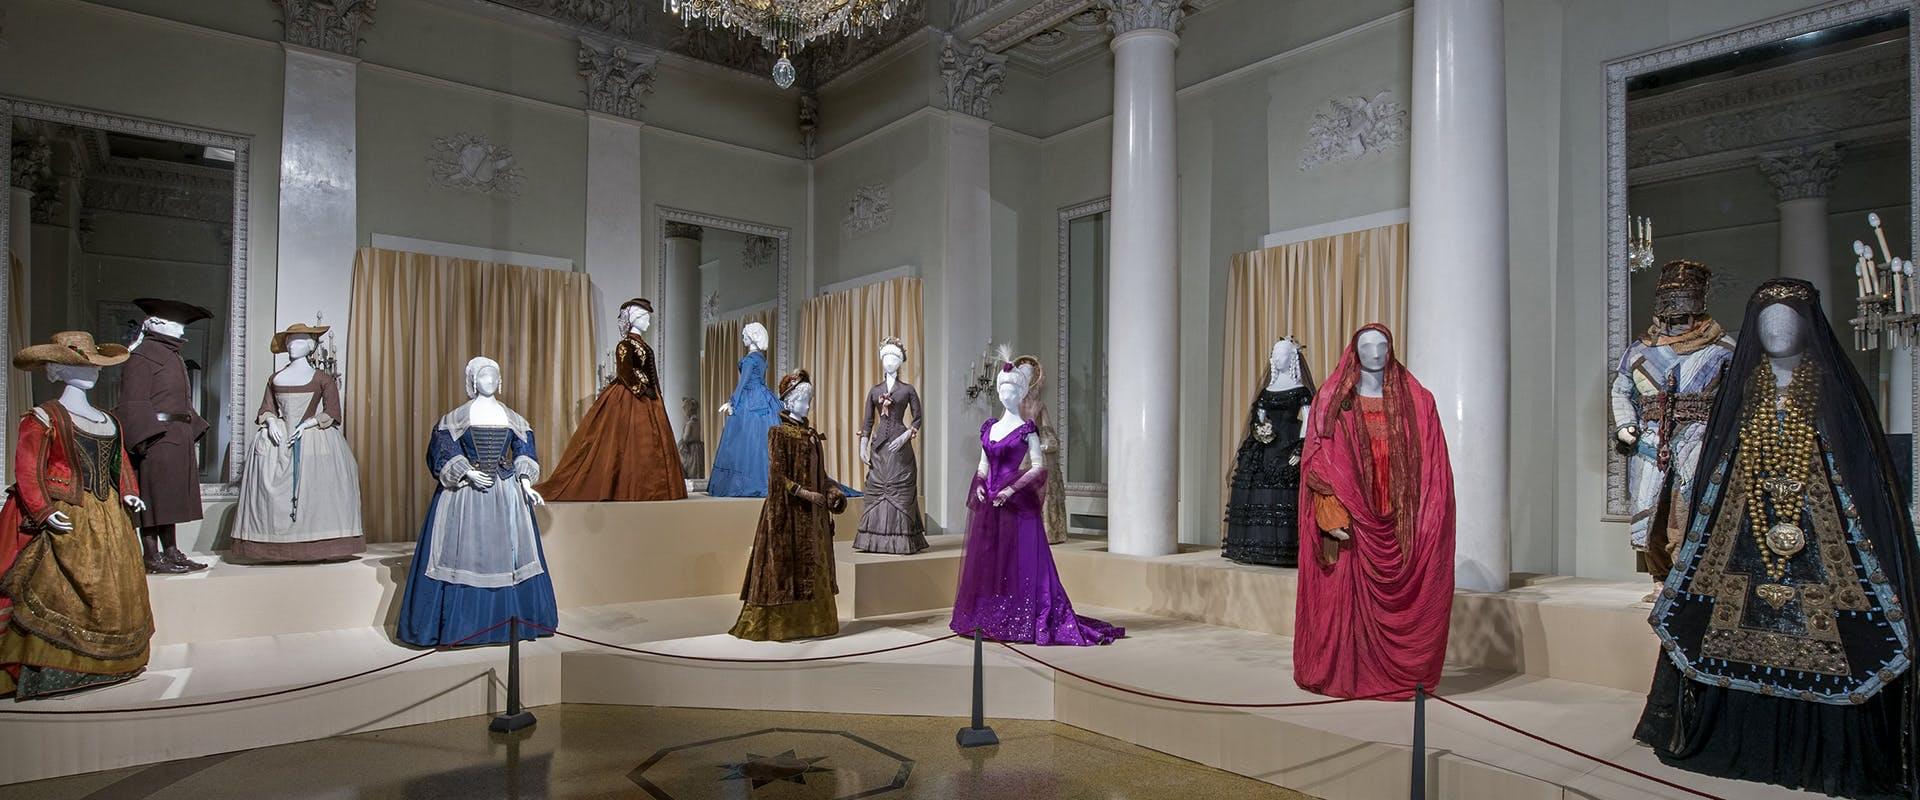 The Museum of Costume and Fashion